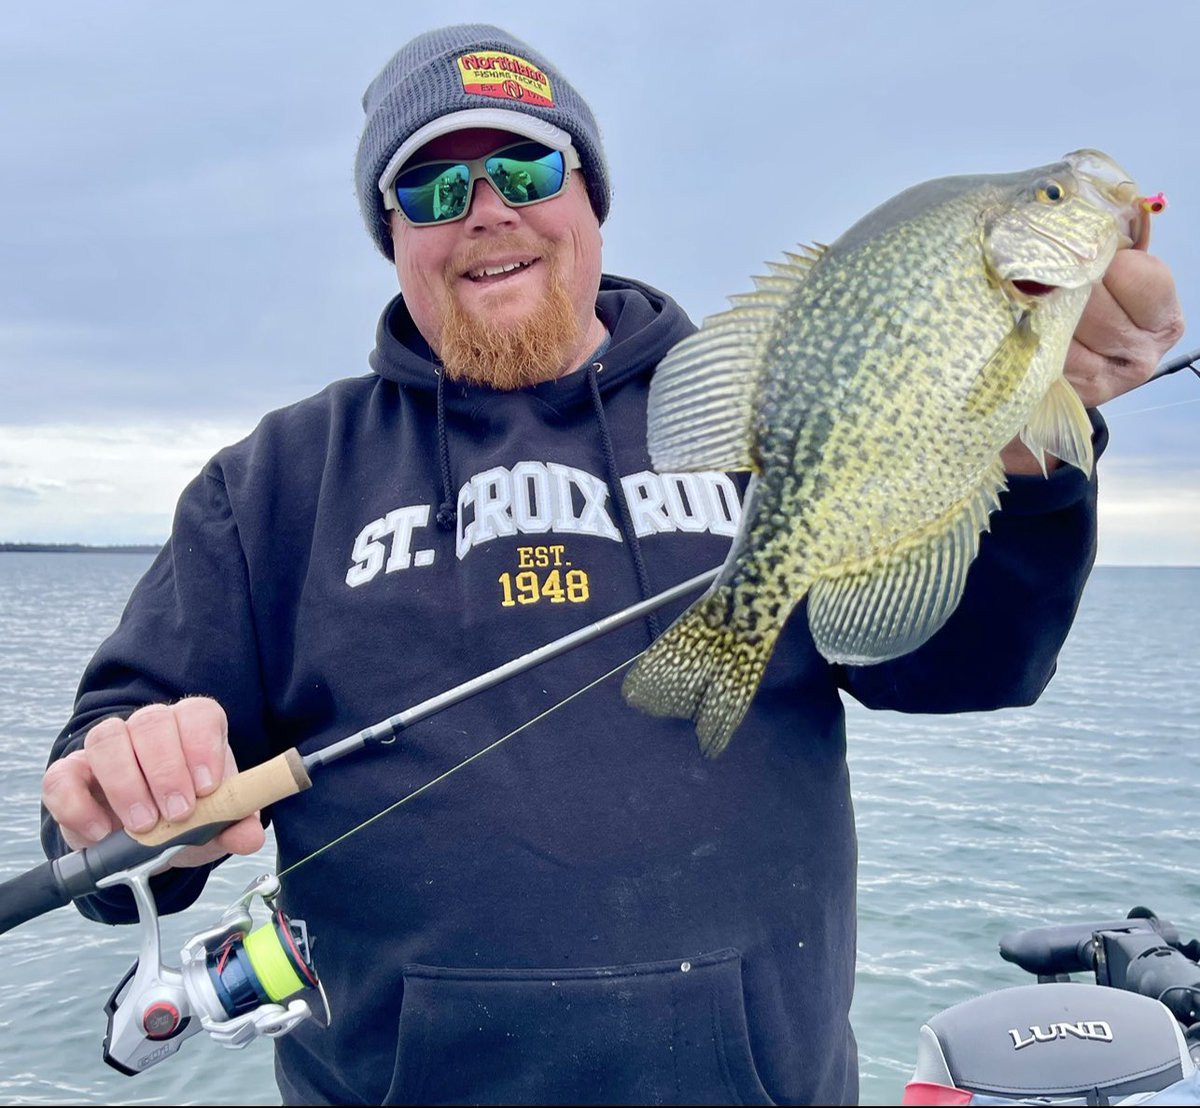 Happy “Fishing Friday’s ‘Anglers!!! 
 Slab Crappie & Jumbo Perch ‘ Are Still biting in Cold Open-Water! 
Good Luck Anglers!
B🎣👍 #enjoyeverymoment #fishingdaily Northland Fishing Tackle **Crappie King Feather Jig ***St. Croix Rods Panfish 7’ & Seviin Reels GX 1000